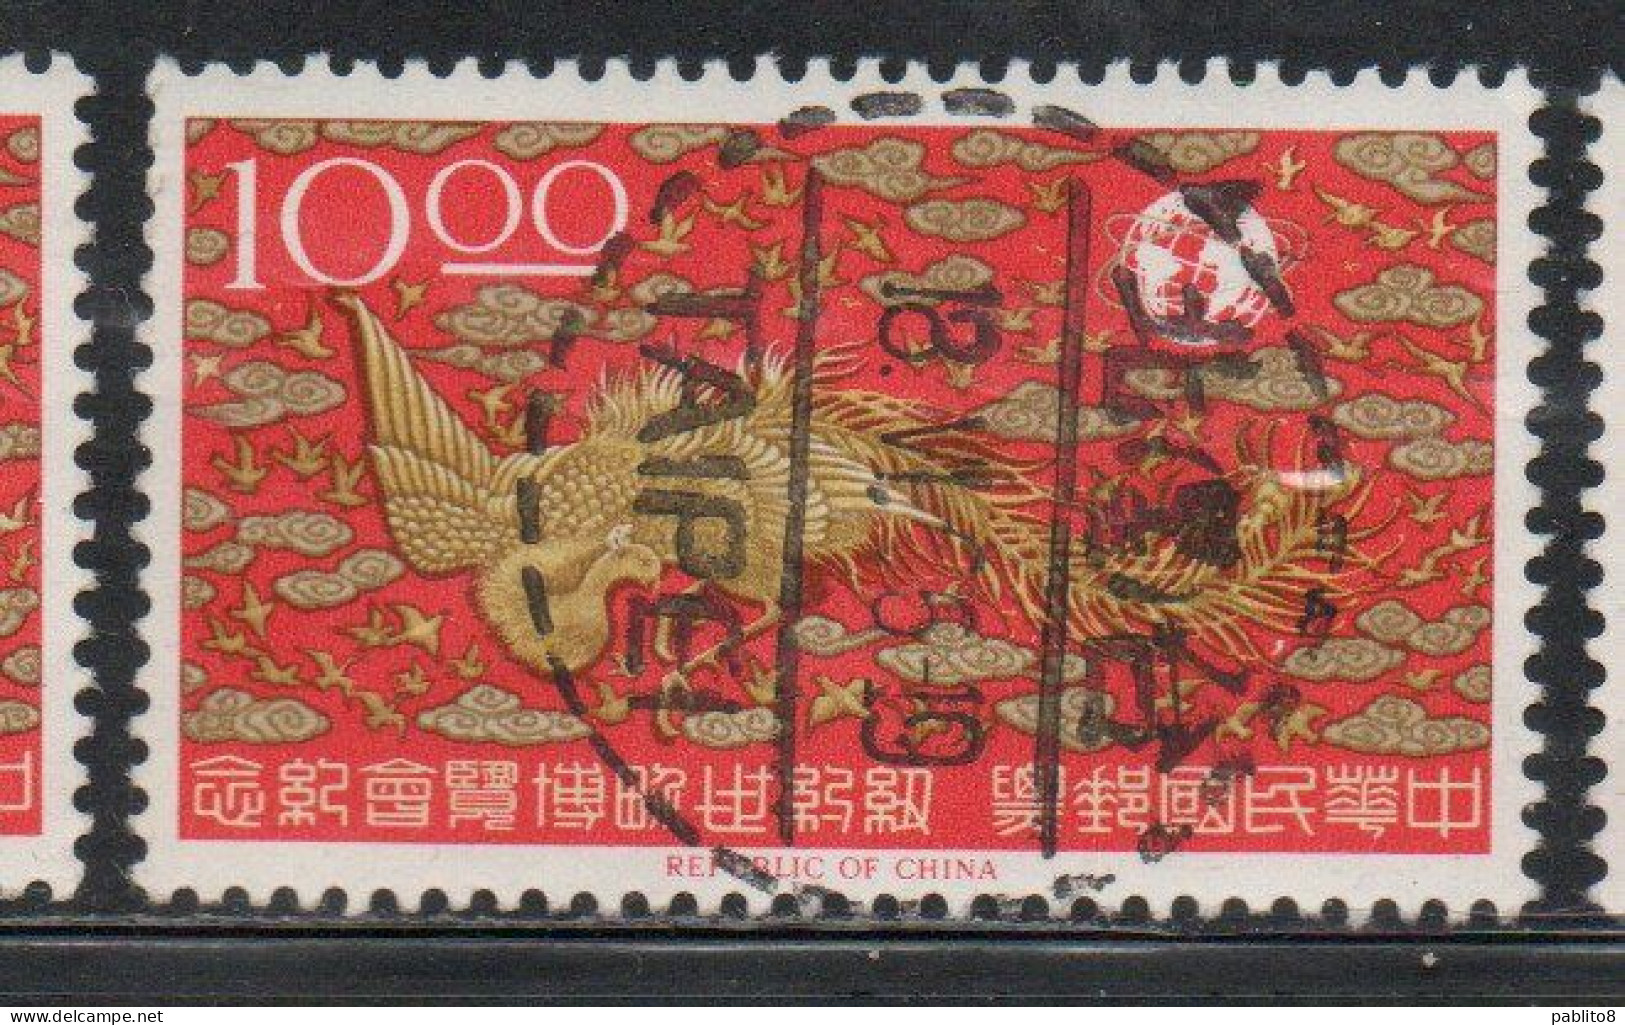 CHINA REPUBLIC CINA TAIWAN FORMOSA 1965 NEW YORK WORLD'S FAIR 100 BIRDS PLAYING HOMAGE TO QUEEN 10$ USED USATO OBLITERE' - Gebraucht